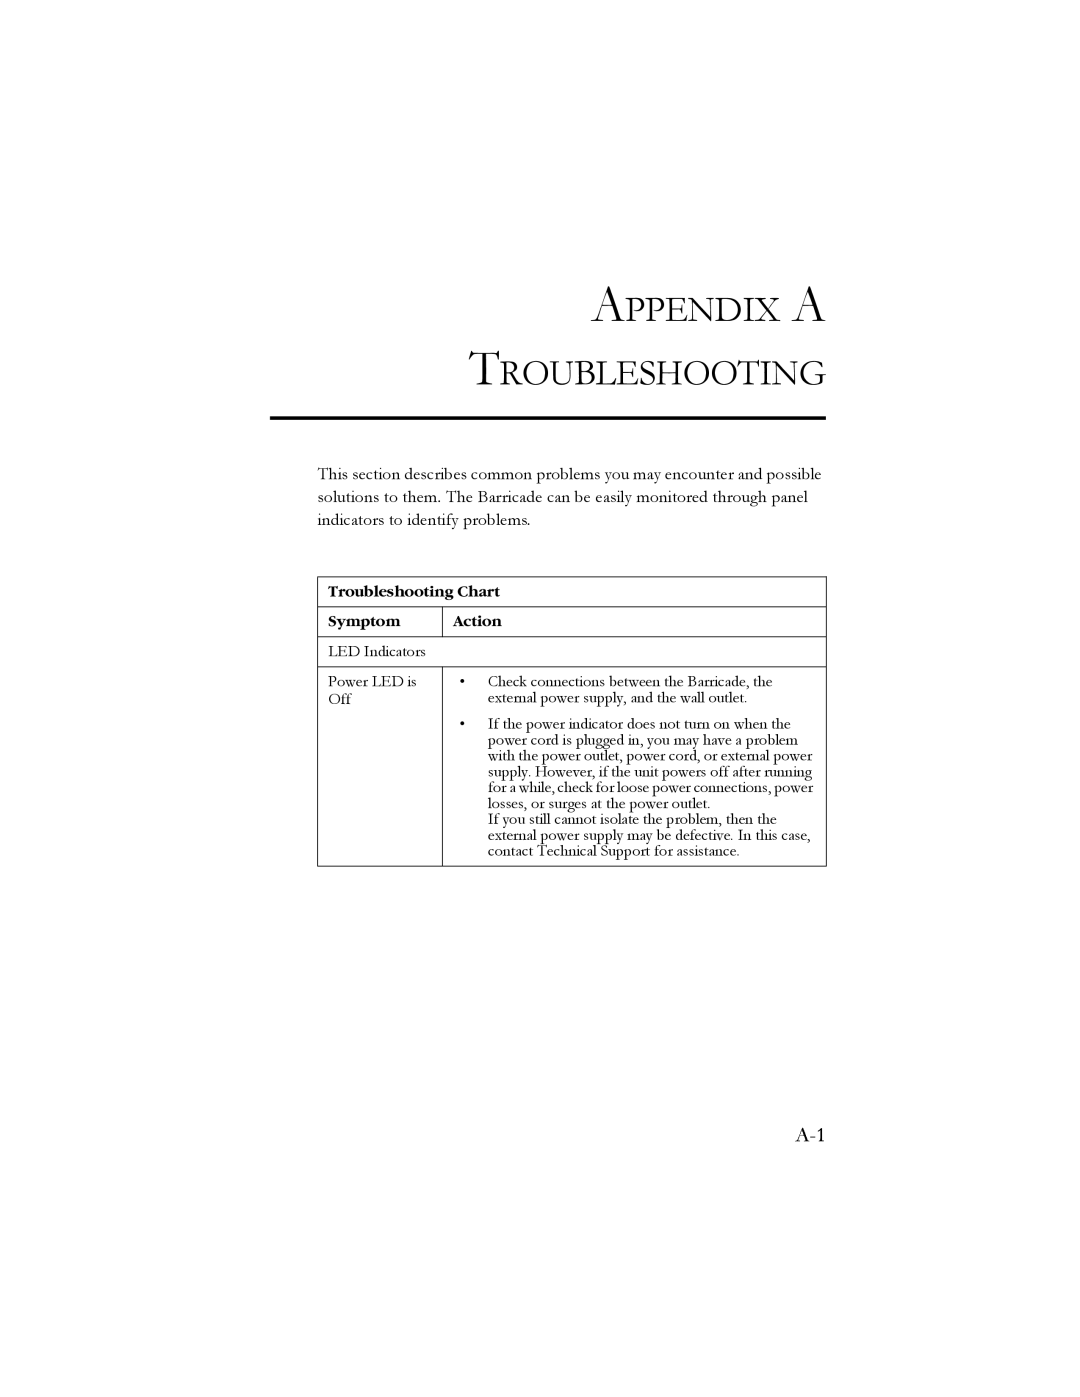 SMC Networks SMC7904BRB2 manual Appendix A Troubleshooting, Troubleshooting Chart, Symptom, Action 